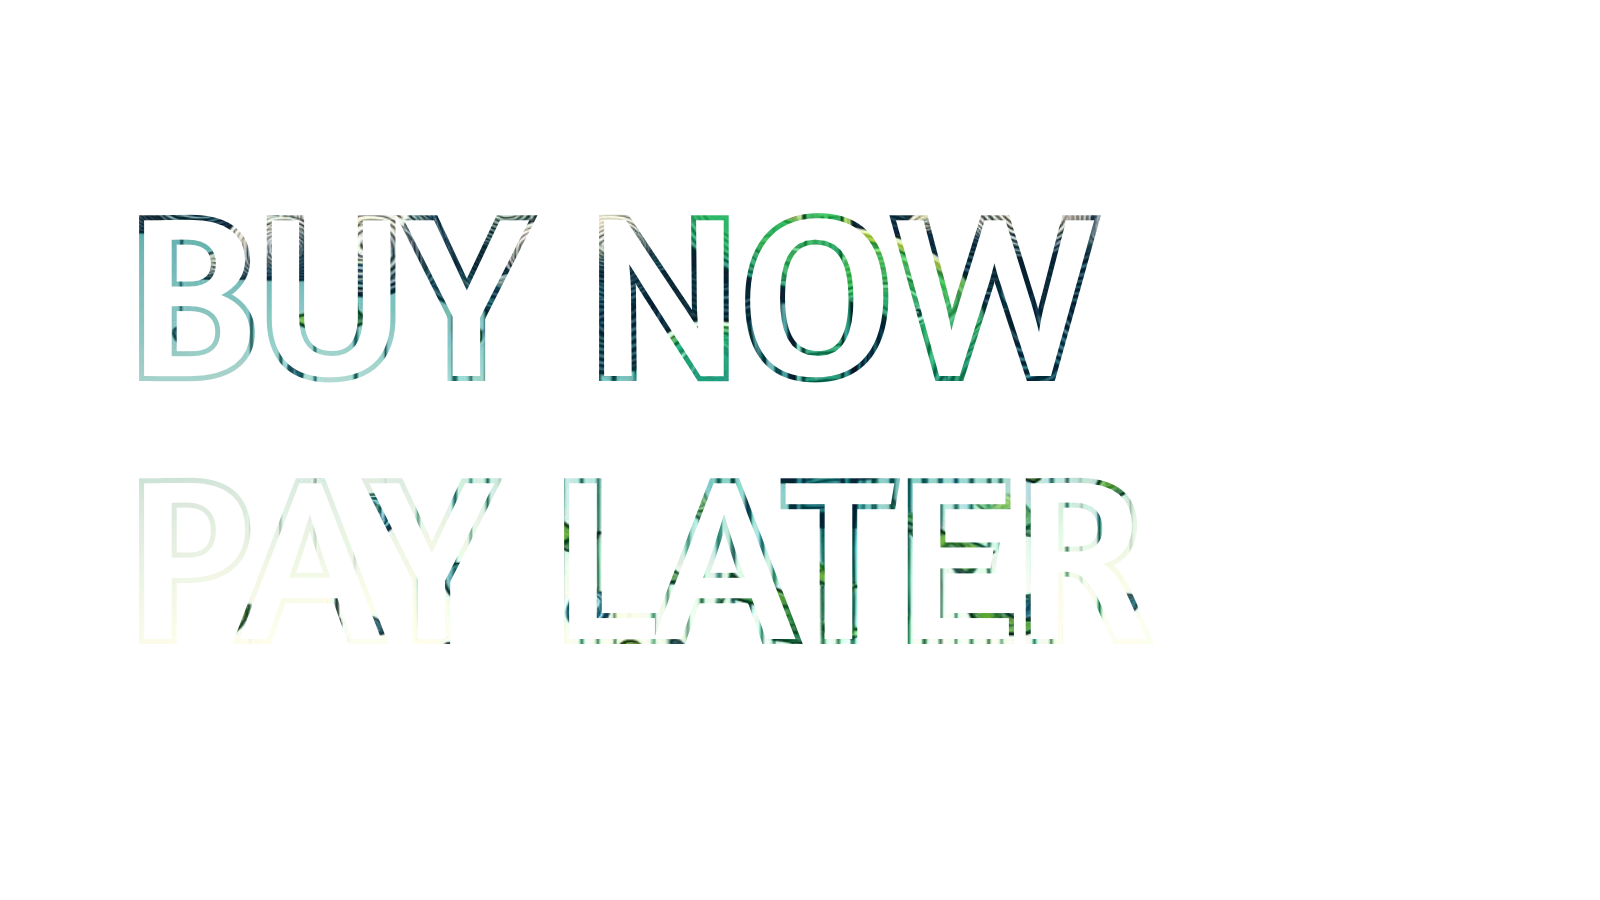 Buy Now, Pay Later